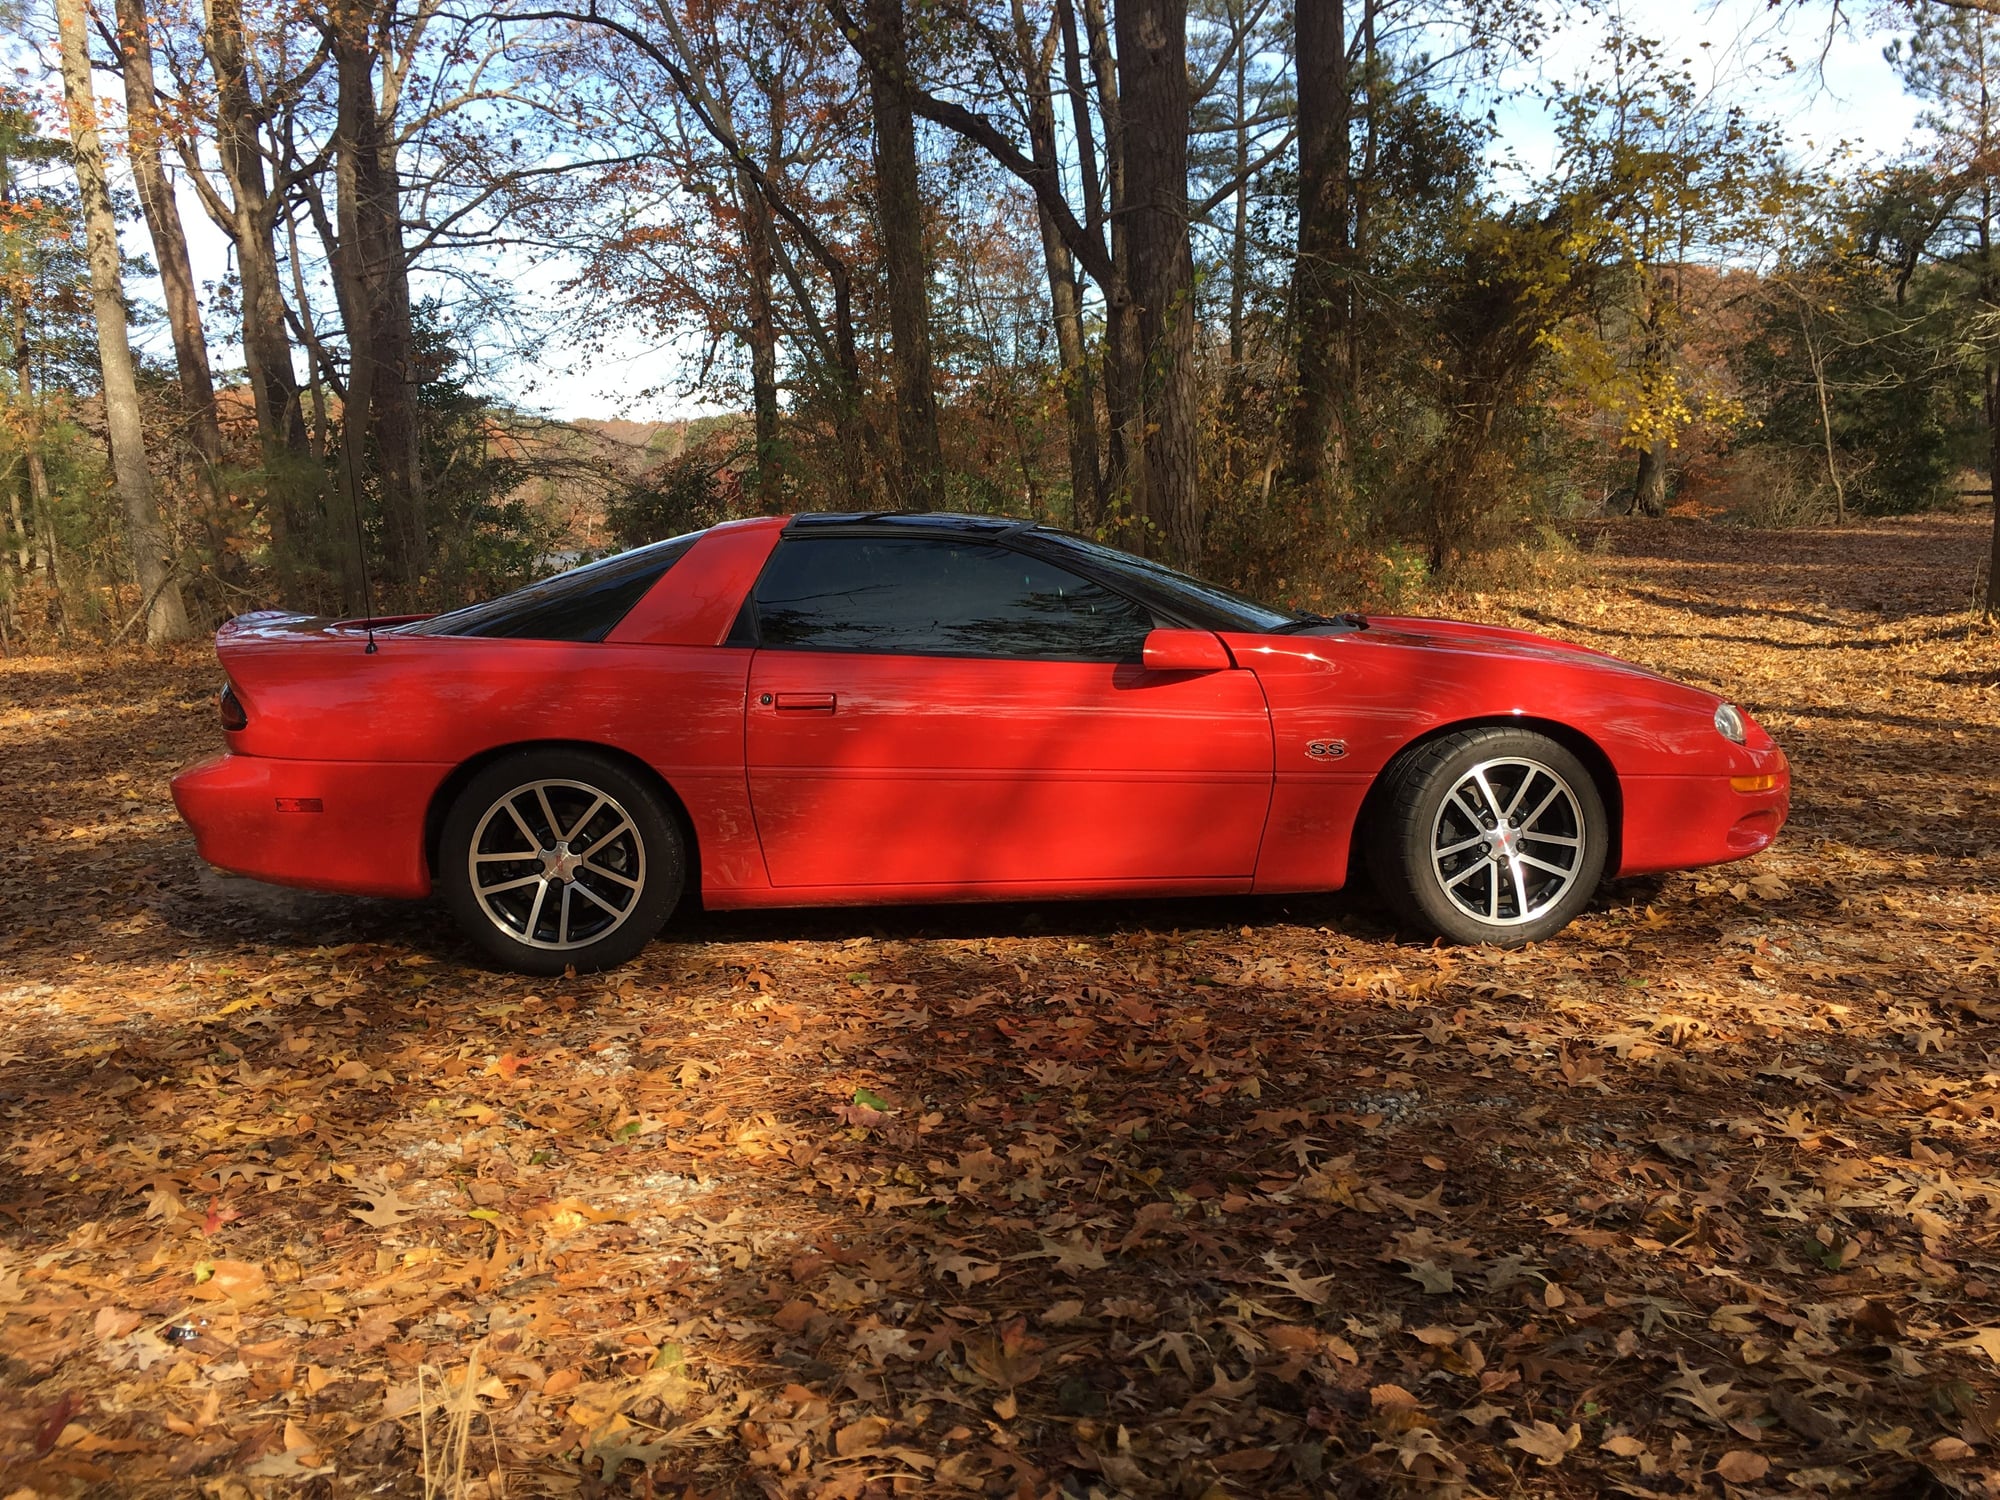 2002 Chevrolet Camaro - 2002 Chevrolet Camaro SS LE 12,000 Miles - Used - VIN 2G1FP22G122123148 - 12,000 Miles - 8 cyl - 2WD - Automatic - Coupe - Red - Fort Eustis, VA 23604, United States